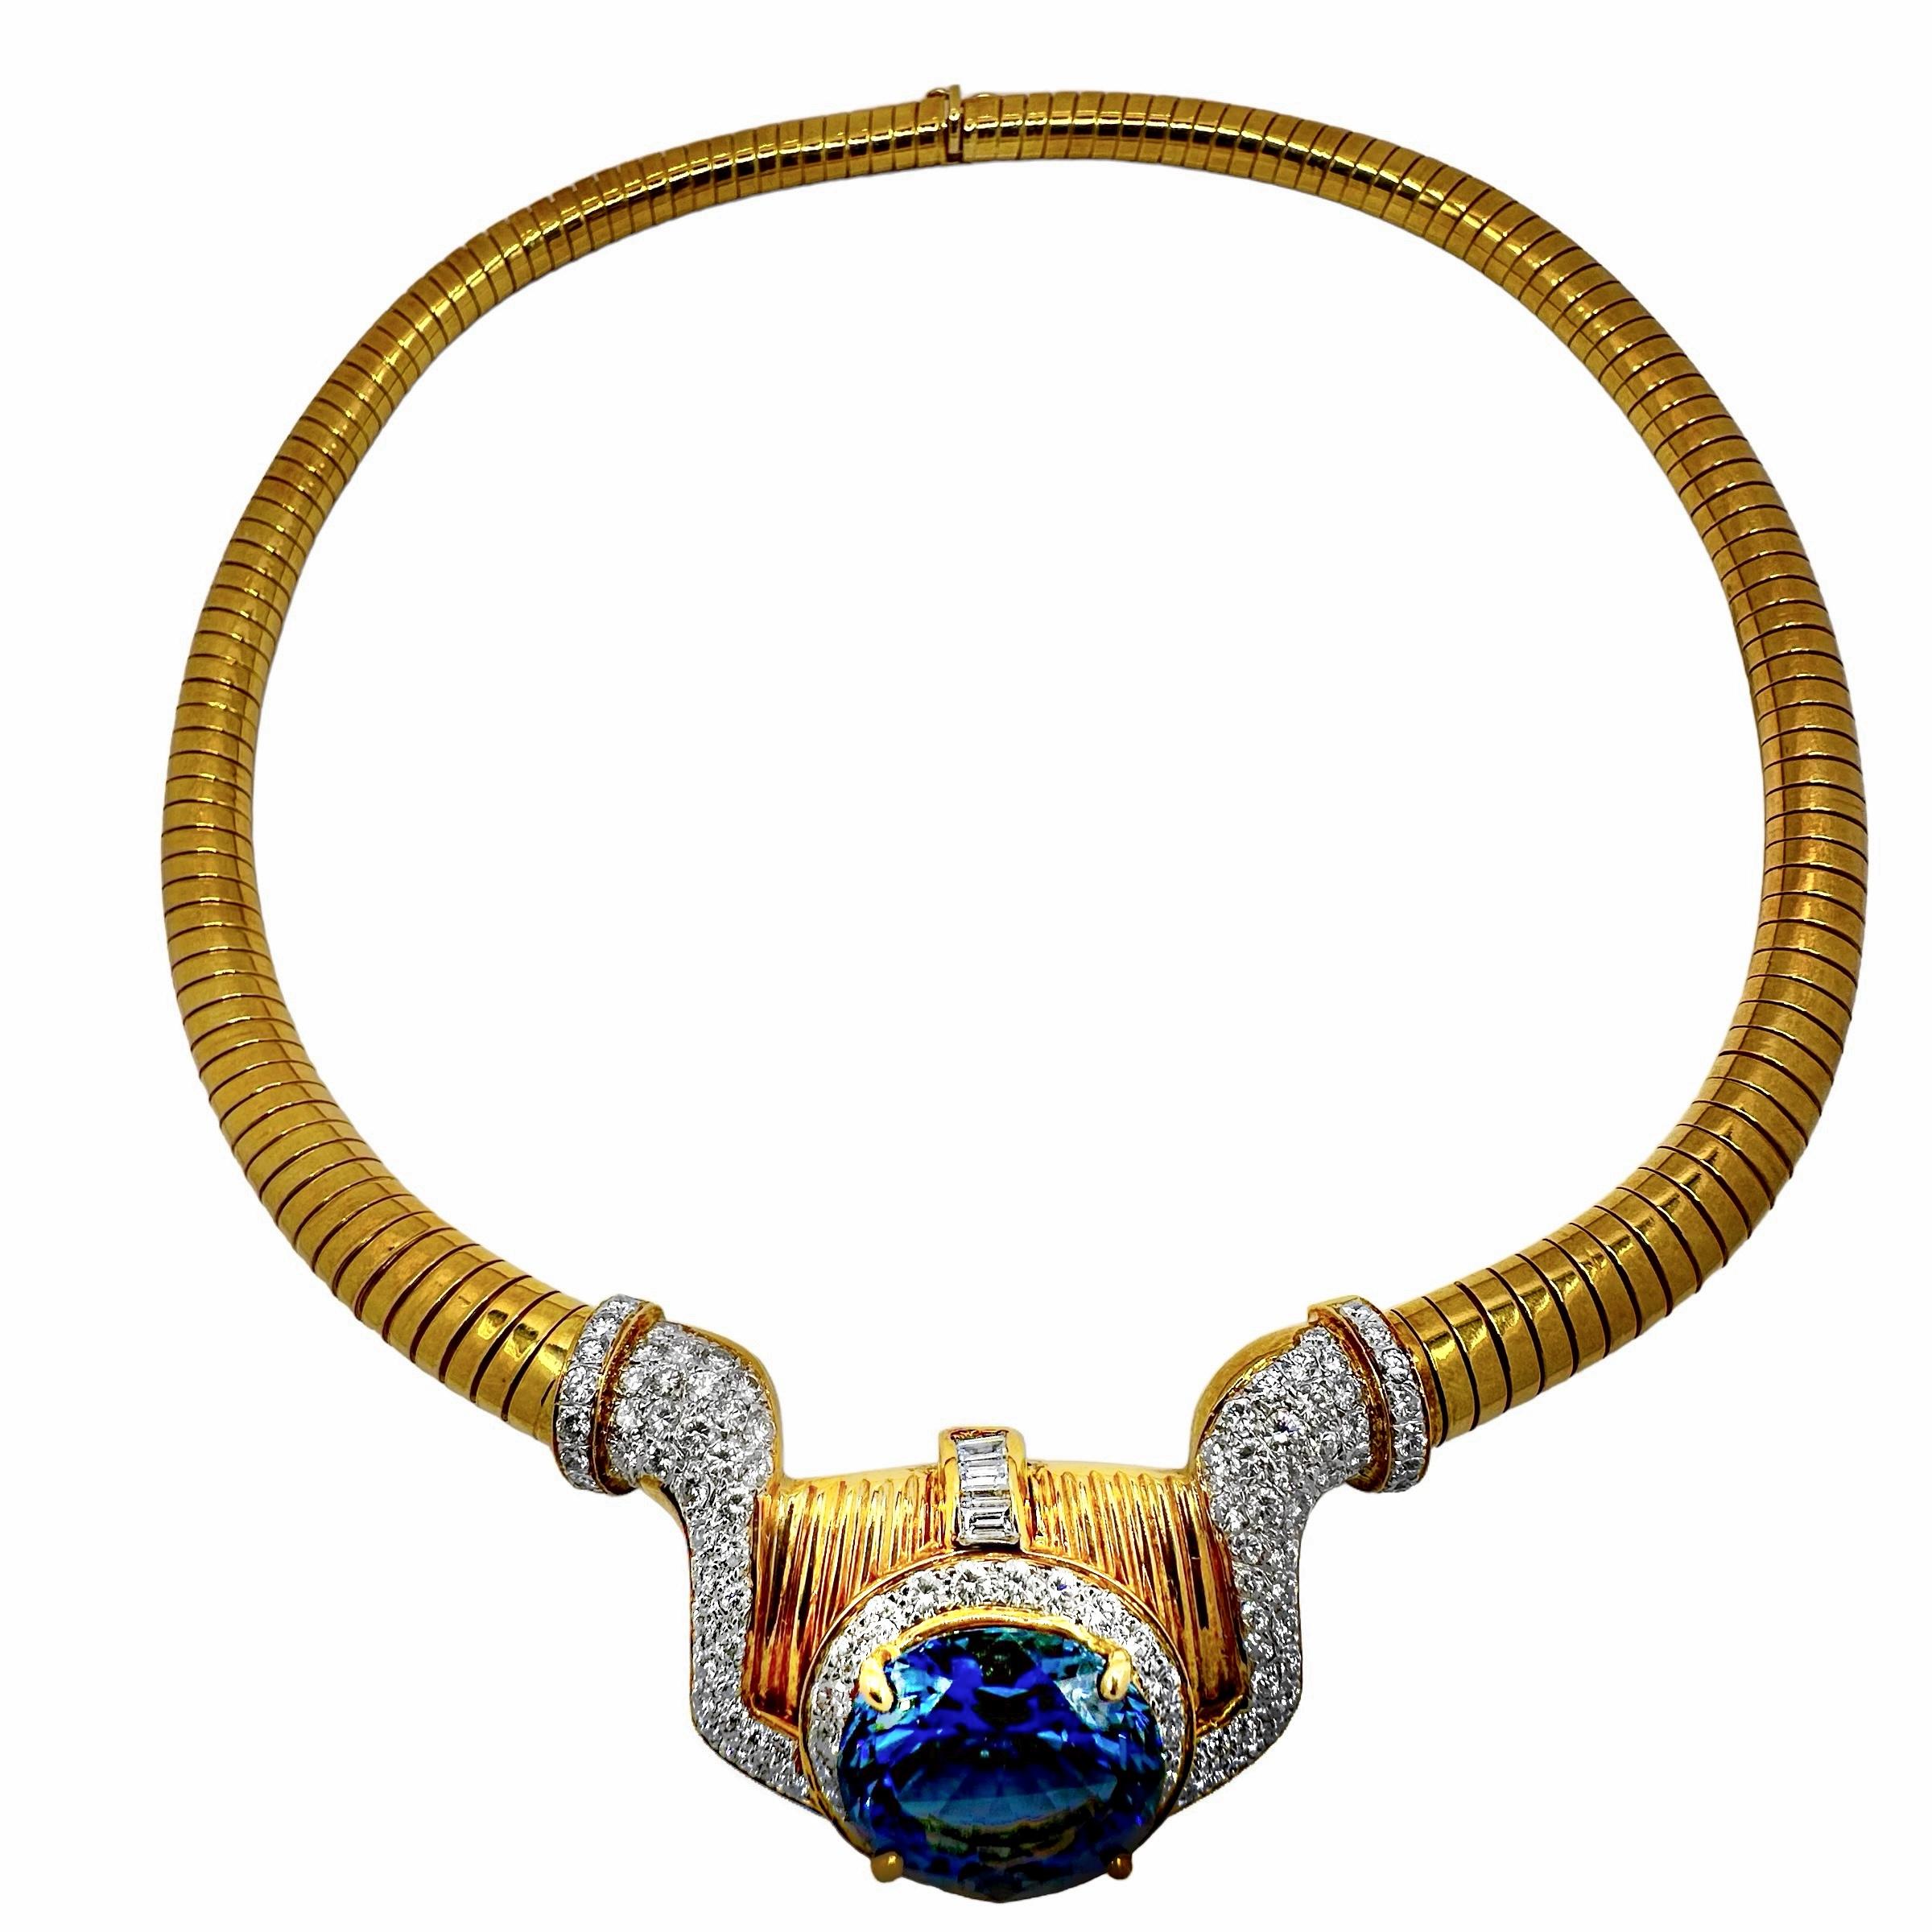 Centered around a vibrant blue/violet Tanzanite, this sleek necklace is an eye catcher. The stunning oval shaped Tanzanite weighs almost 13ct (approximately 12.85ct) and is surrounded by round brilliant cut diamonds. The diamonds then extend to the